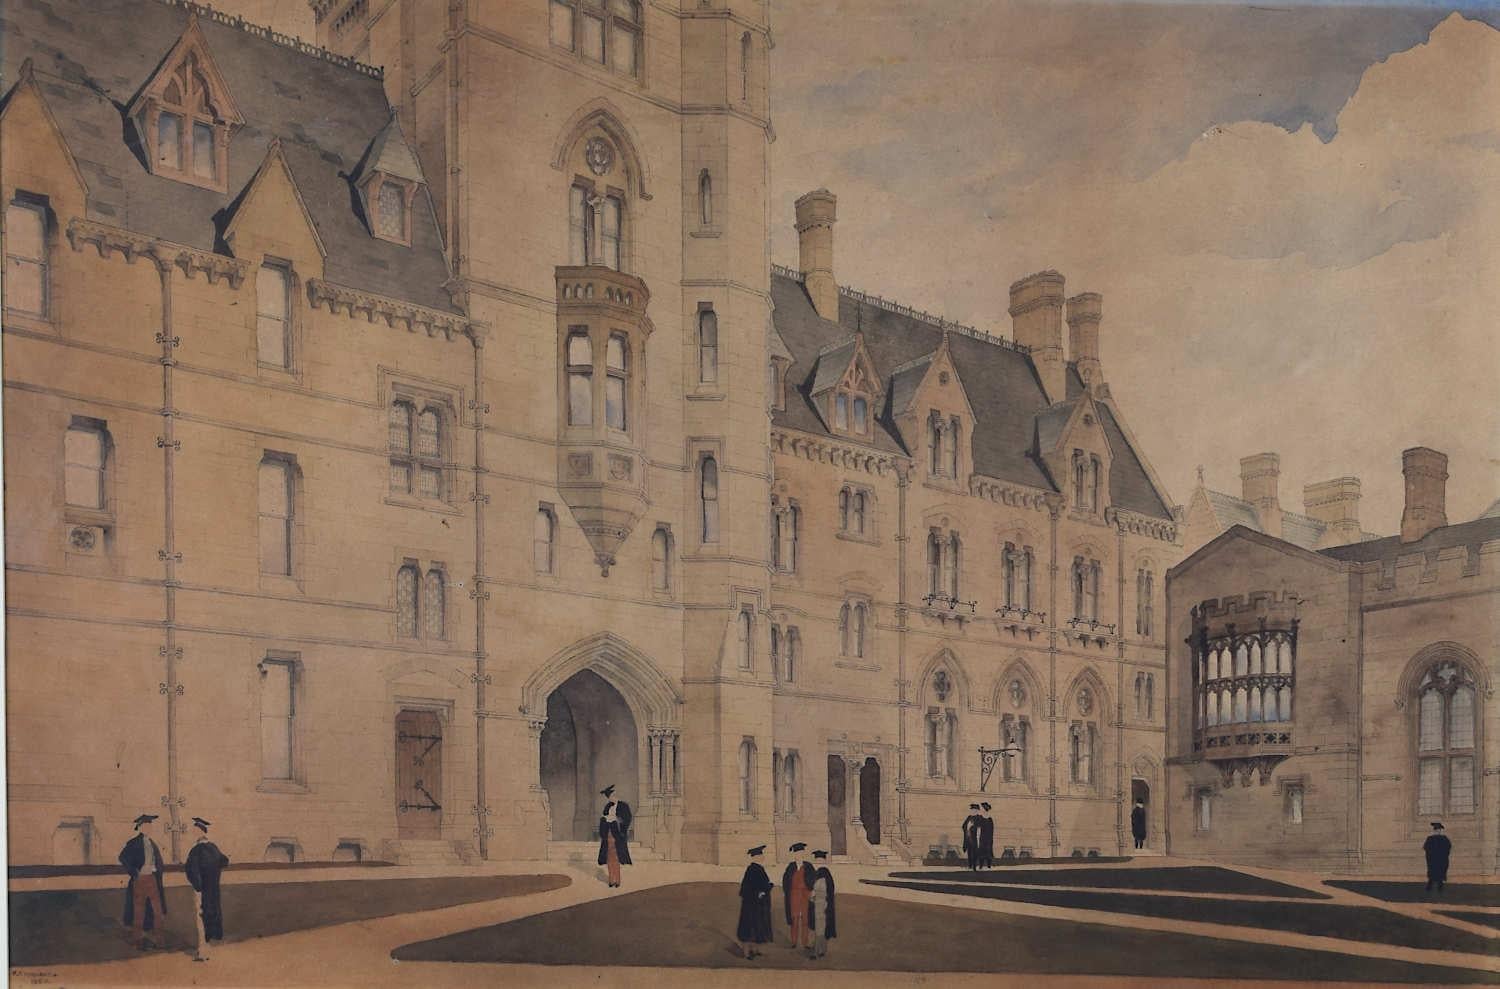 To see our other views of Oxford and Cambridge, scroll down to "More from this Seller" and below it click on "See all from this Seller" - or send us a message if you cannot find the view you want.

F F Hoyland
Balliol College, Oxford